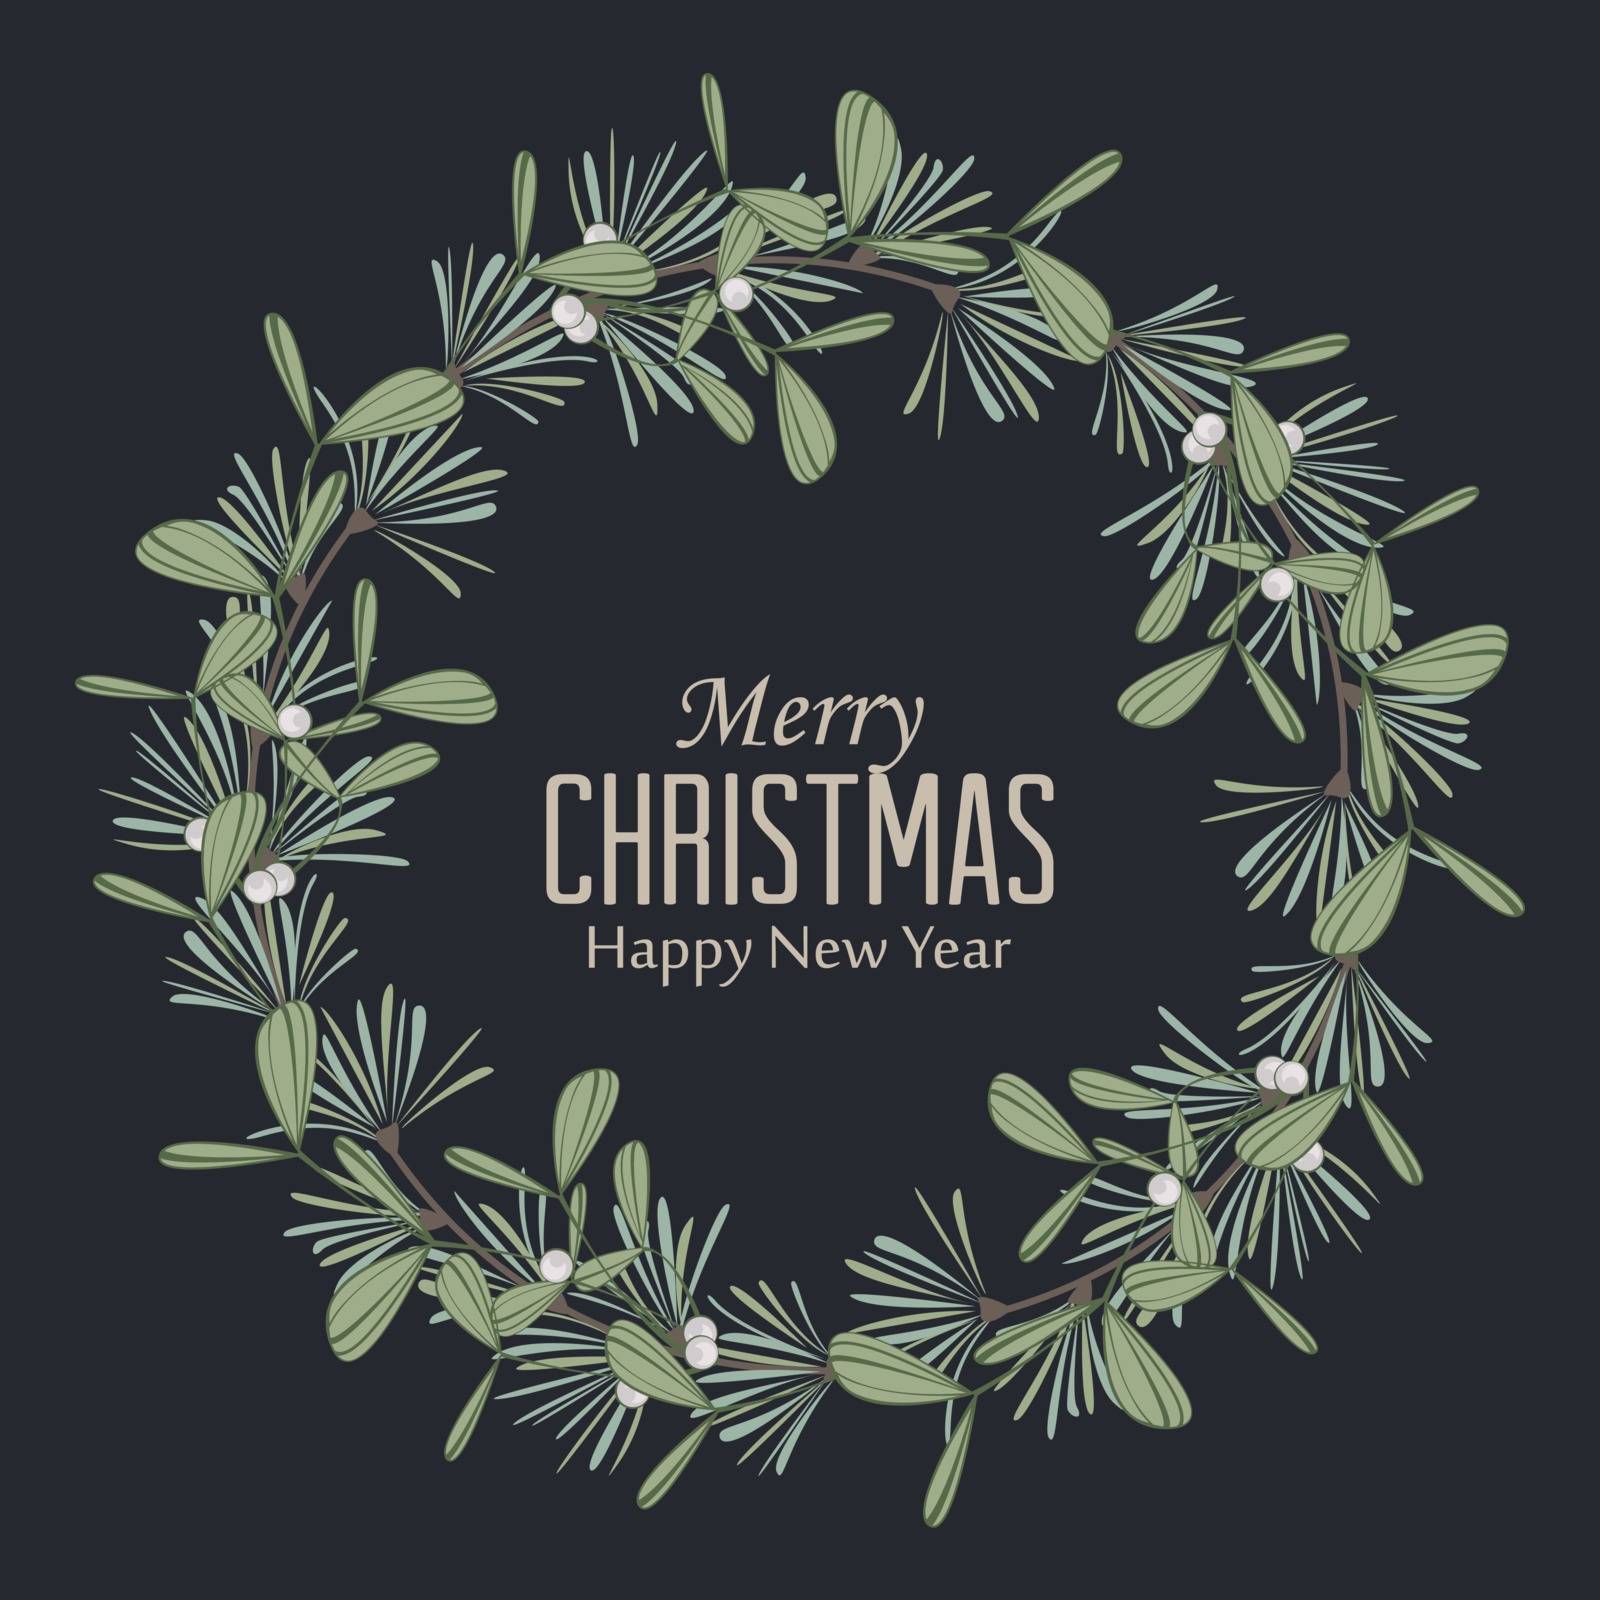 Vector illustration of Christmas wreath with branches and mistletoe. Happy Christmas greeting card